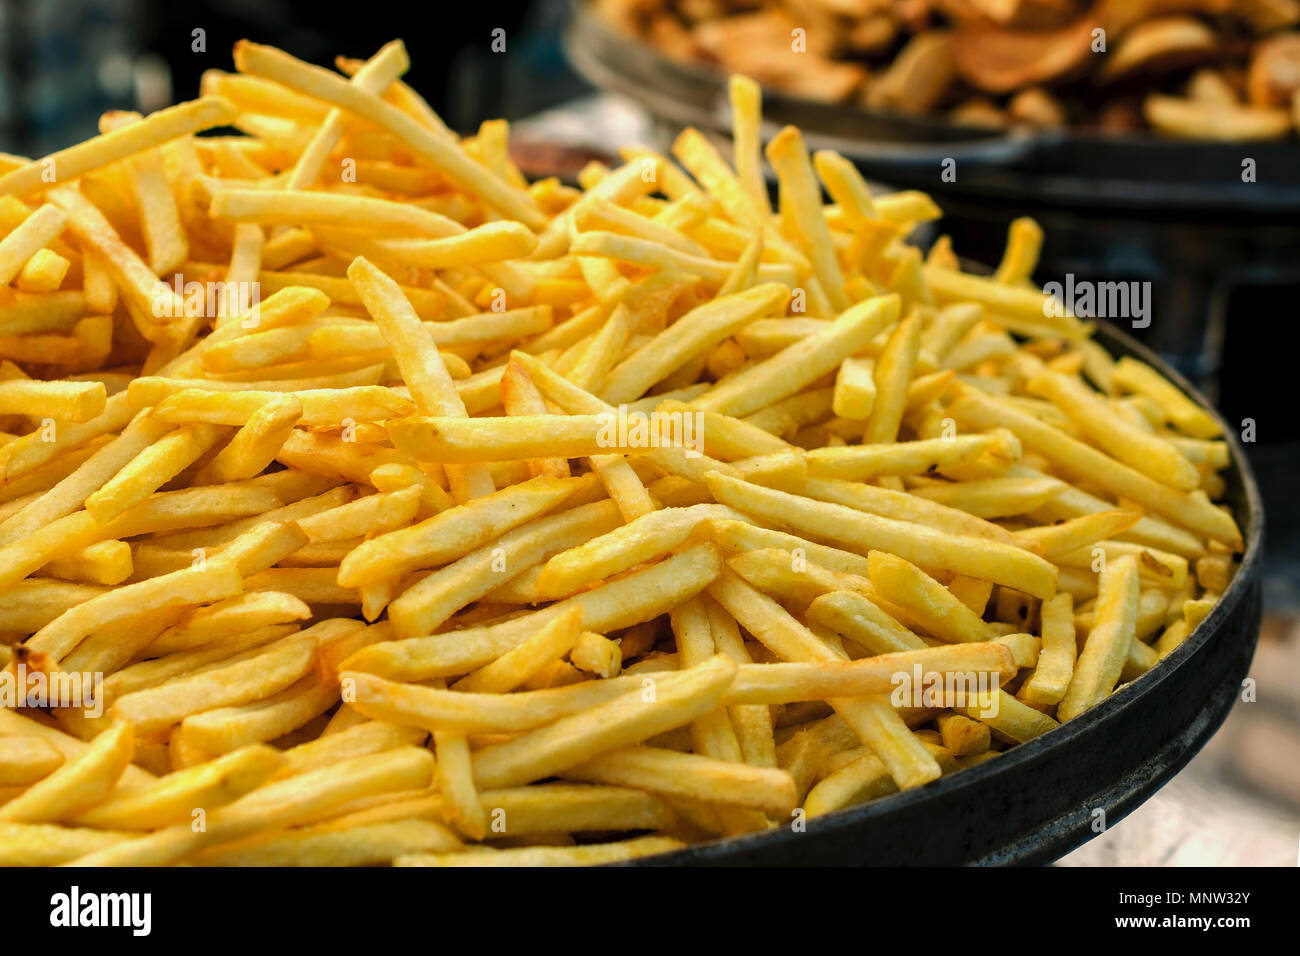 Production of french fries. Large pan of fresh fried sweet potato. Close-up. Stock Photo